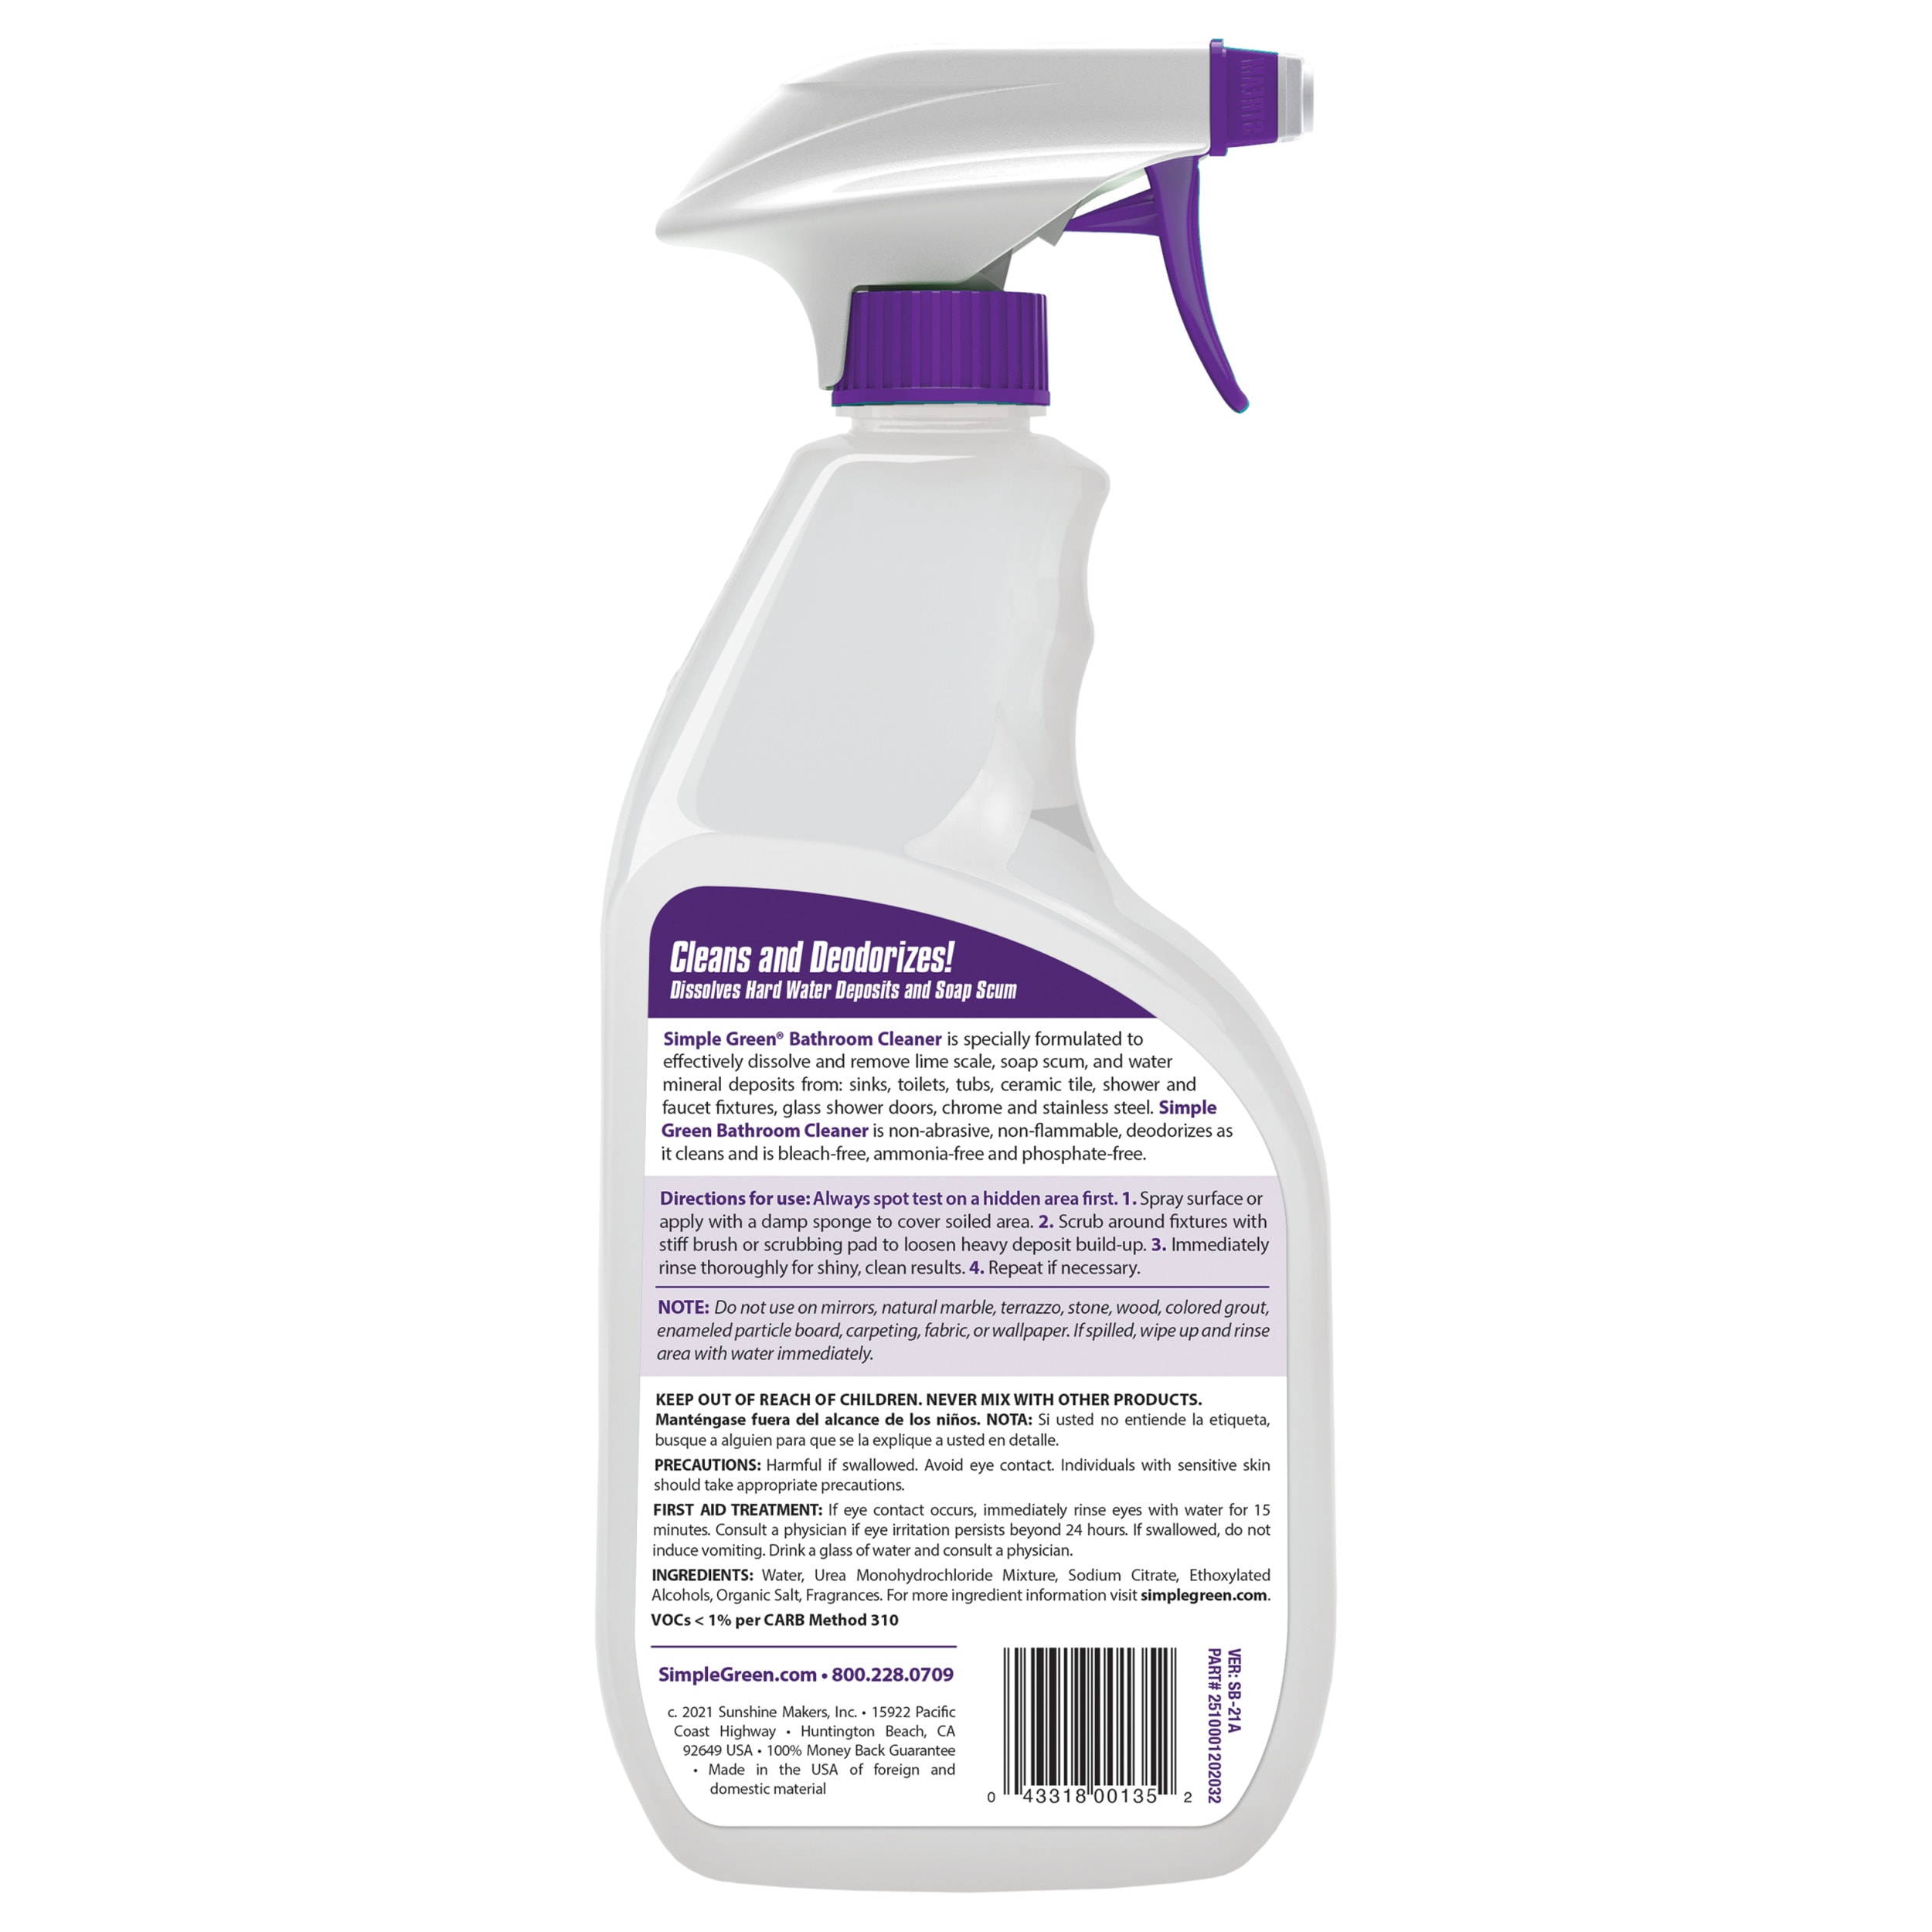 Clean Shower Daily Shower Cleaner 32 fl oz. Bleach and Ammonia Free 